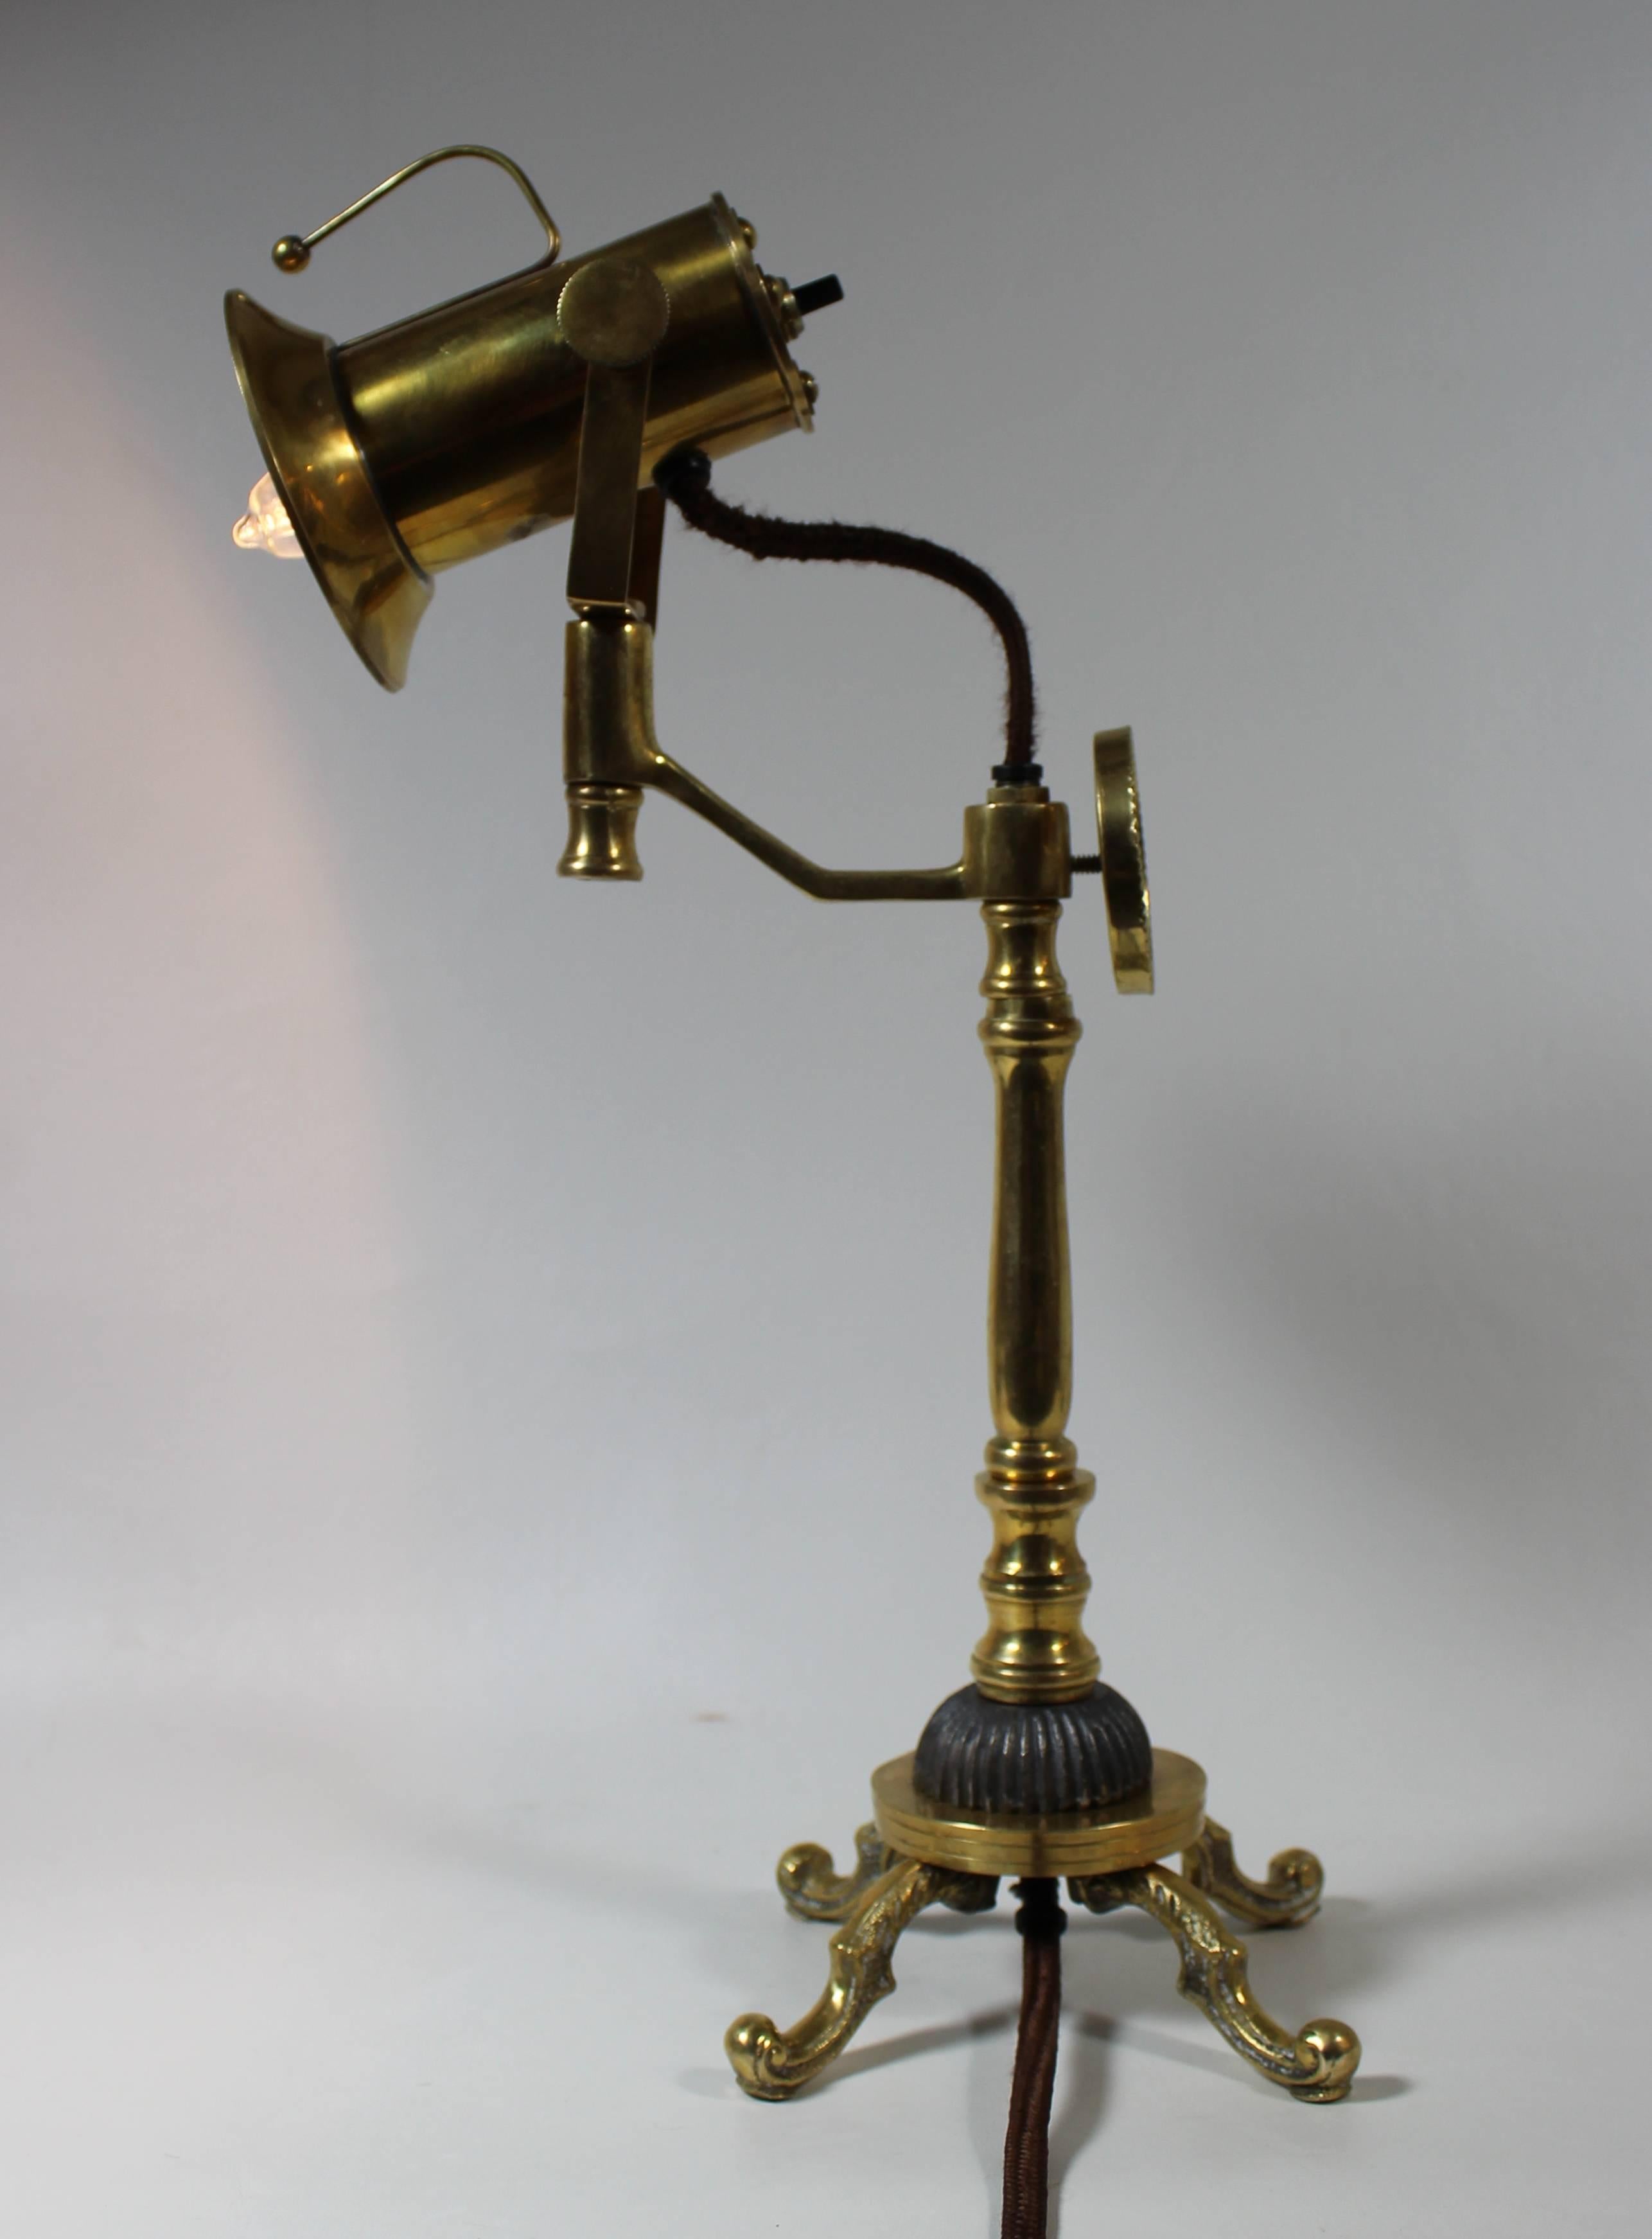 Steampunk Nautical Industrial lamp.

Free shipping within the United States and Canada.